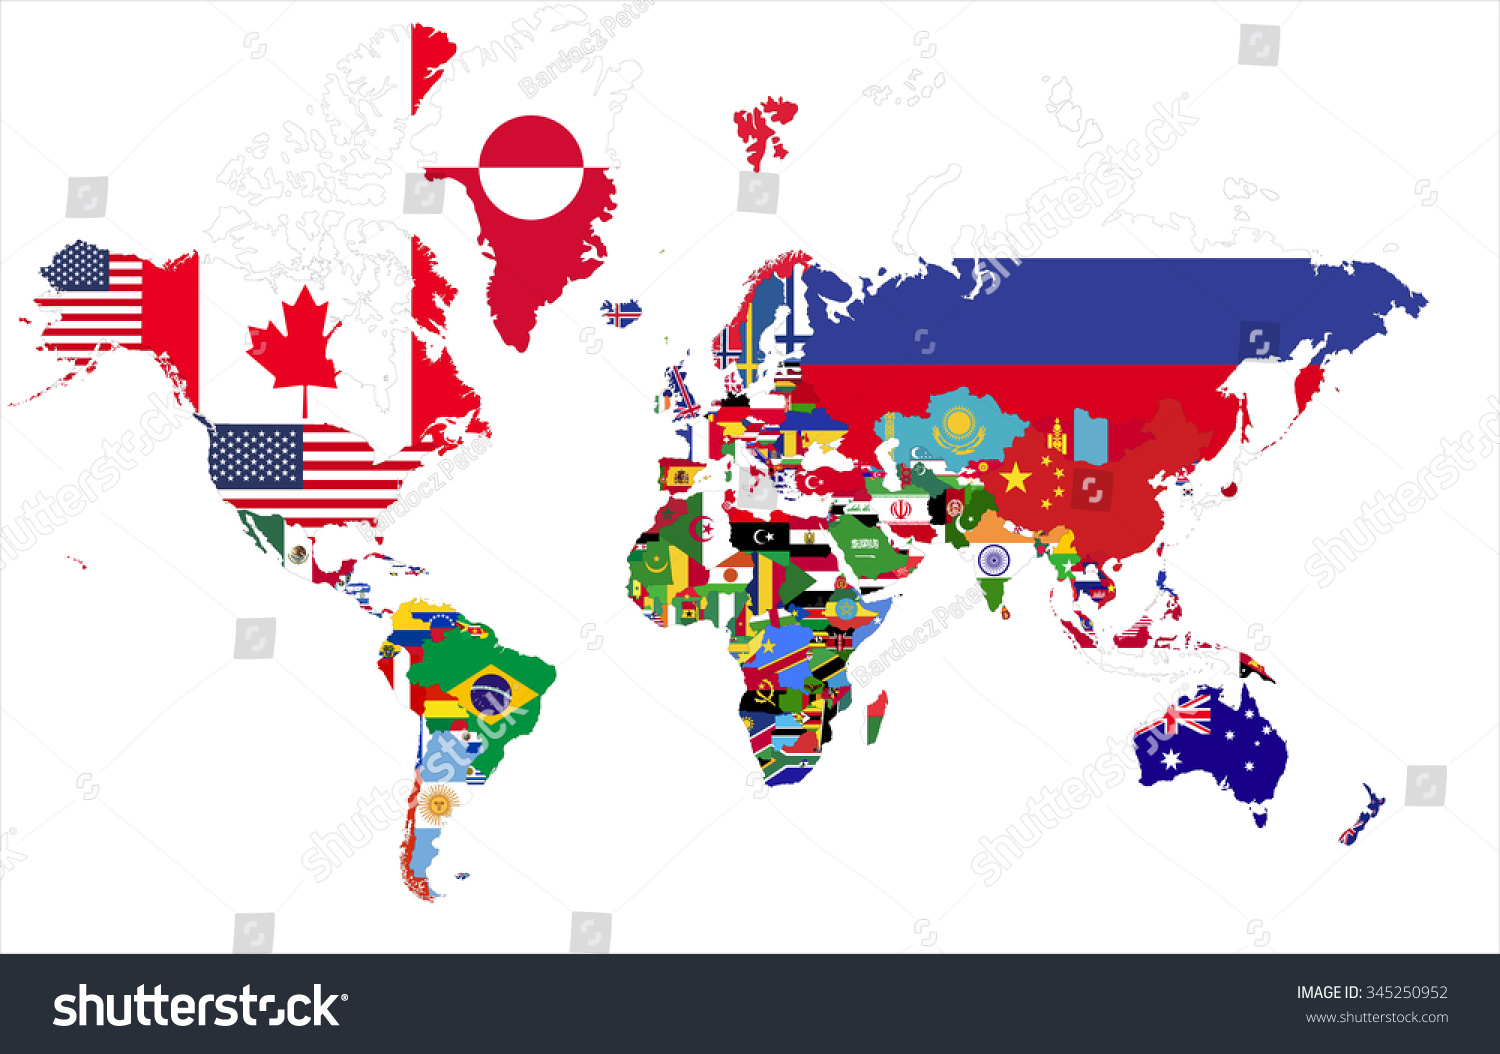 Political Map Of The World With Country Flags Royalty Free Stock Vector 345250952 3305